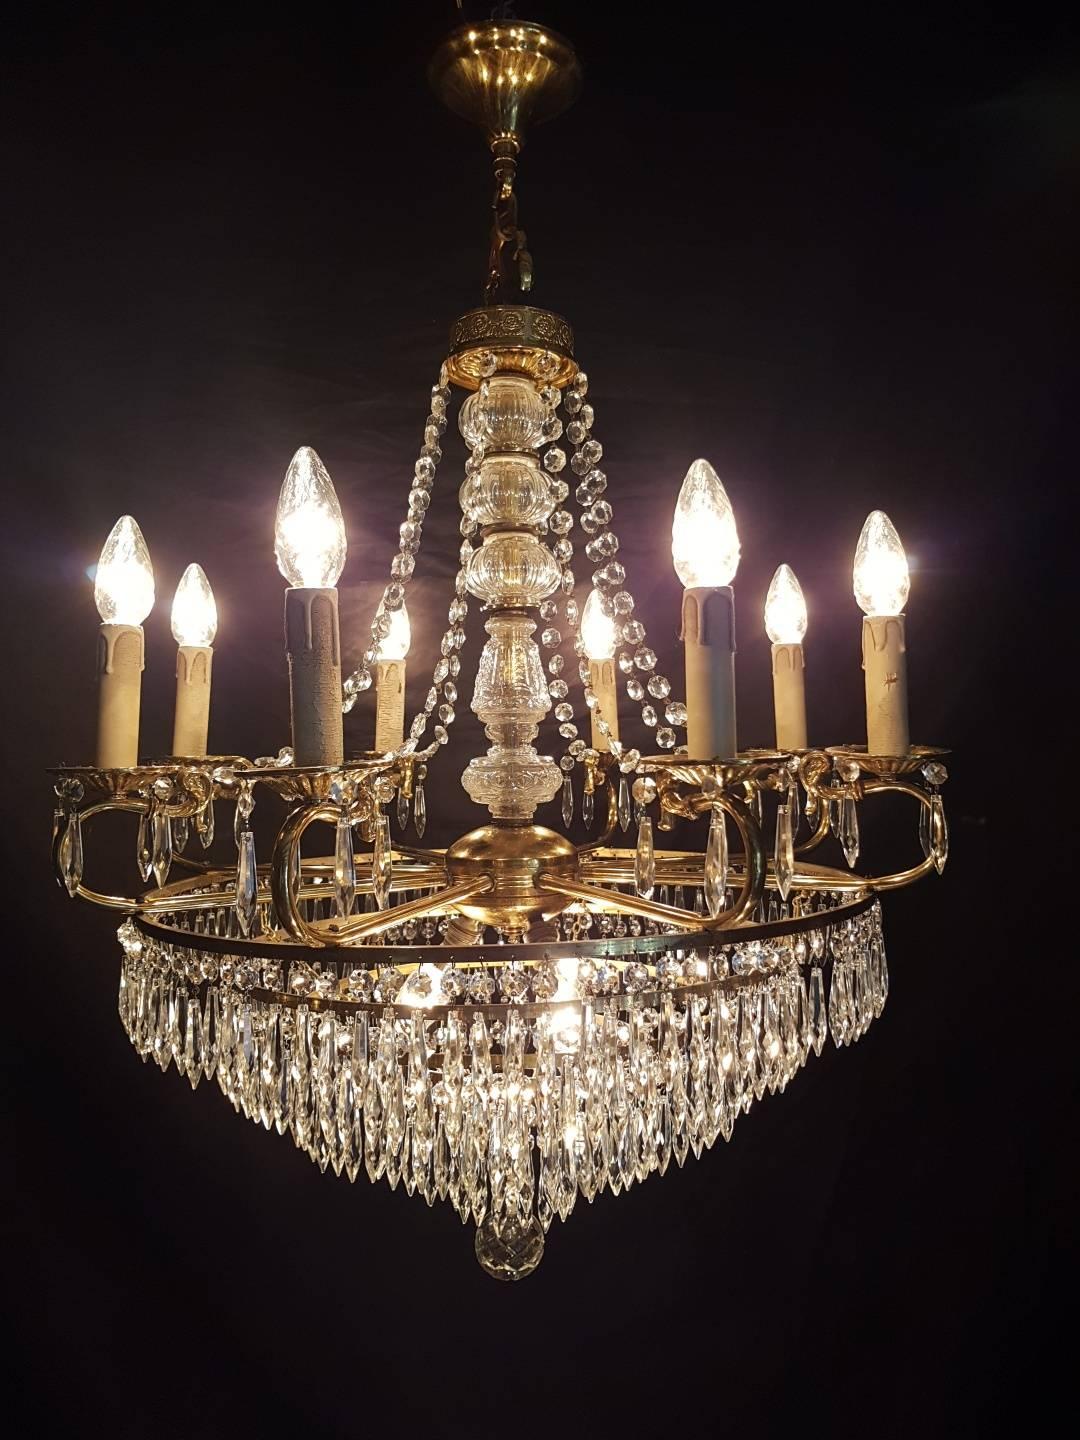 Waterfall chandelier in empire style with eleven lights. Eight candle lights and three lights inside the chandelier. 'The Waterfall' is a total of five metal rings with point-shaped crystals. In the centre a very nice crystal ball.

This is just